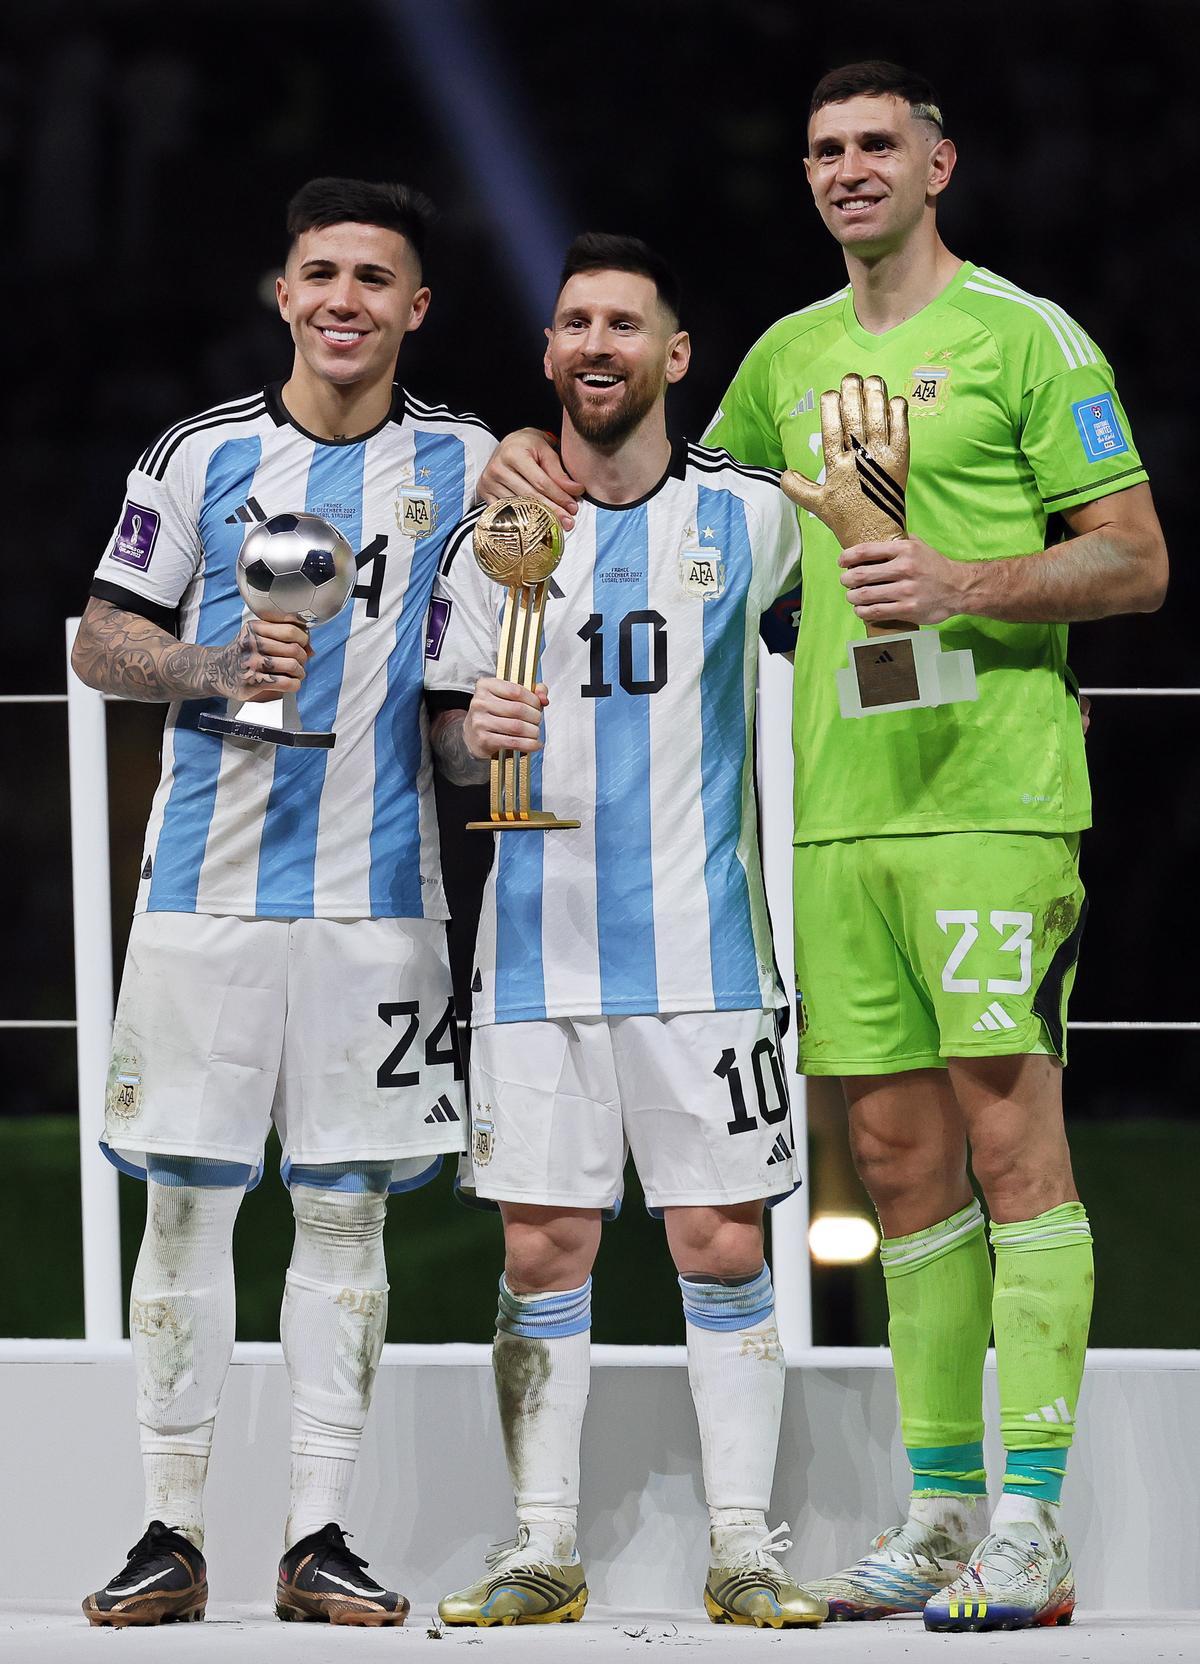 Lusail (Qatar), 18/12/2022.- Argentinian players (L-R) Enzo Fernandez, Lionel Messi, and goalkeeper Emiliano Martinez, pose with their award trophies after the FIFA World Cup 2022 Final between Argentina and France at Lusail stadium in Lusail, Qatar, 18 December 2022. Argentina won 4-2 on penalties. (Mundial de Fútbol, Francia, Estados Unidos, Catar) EFE/EPA/Ronald Wittek